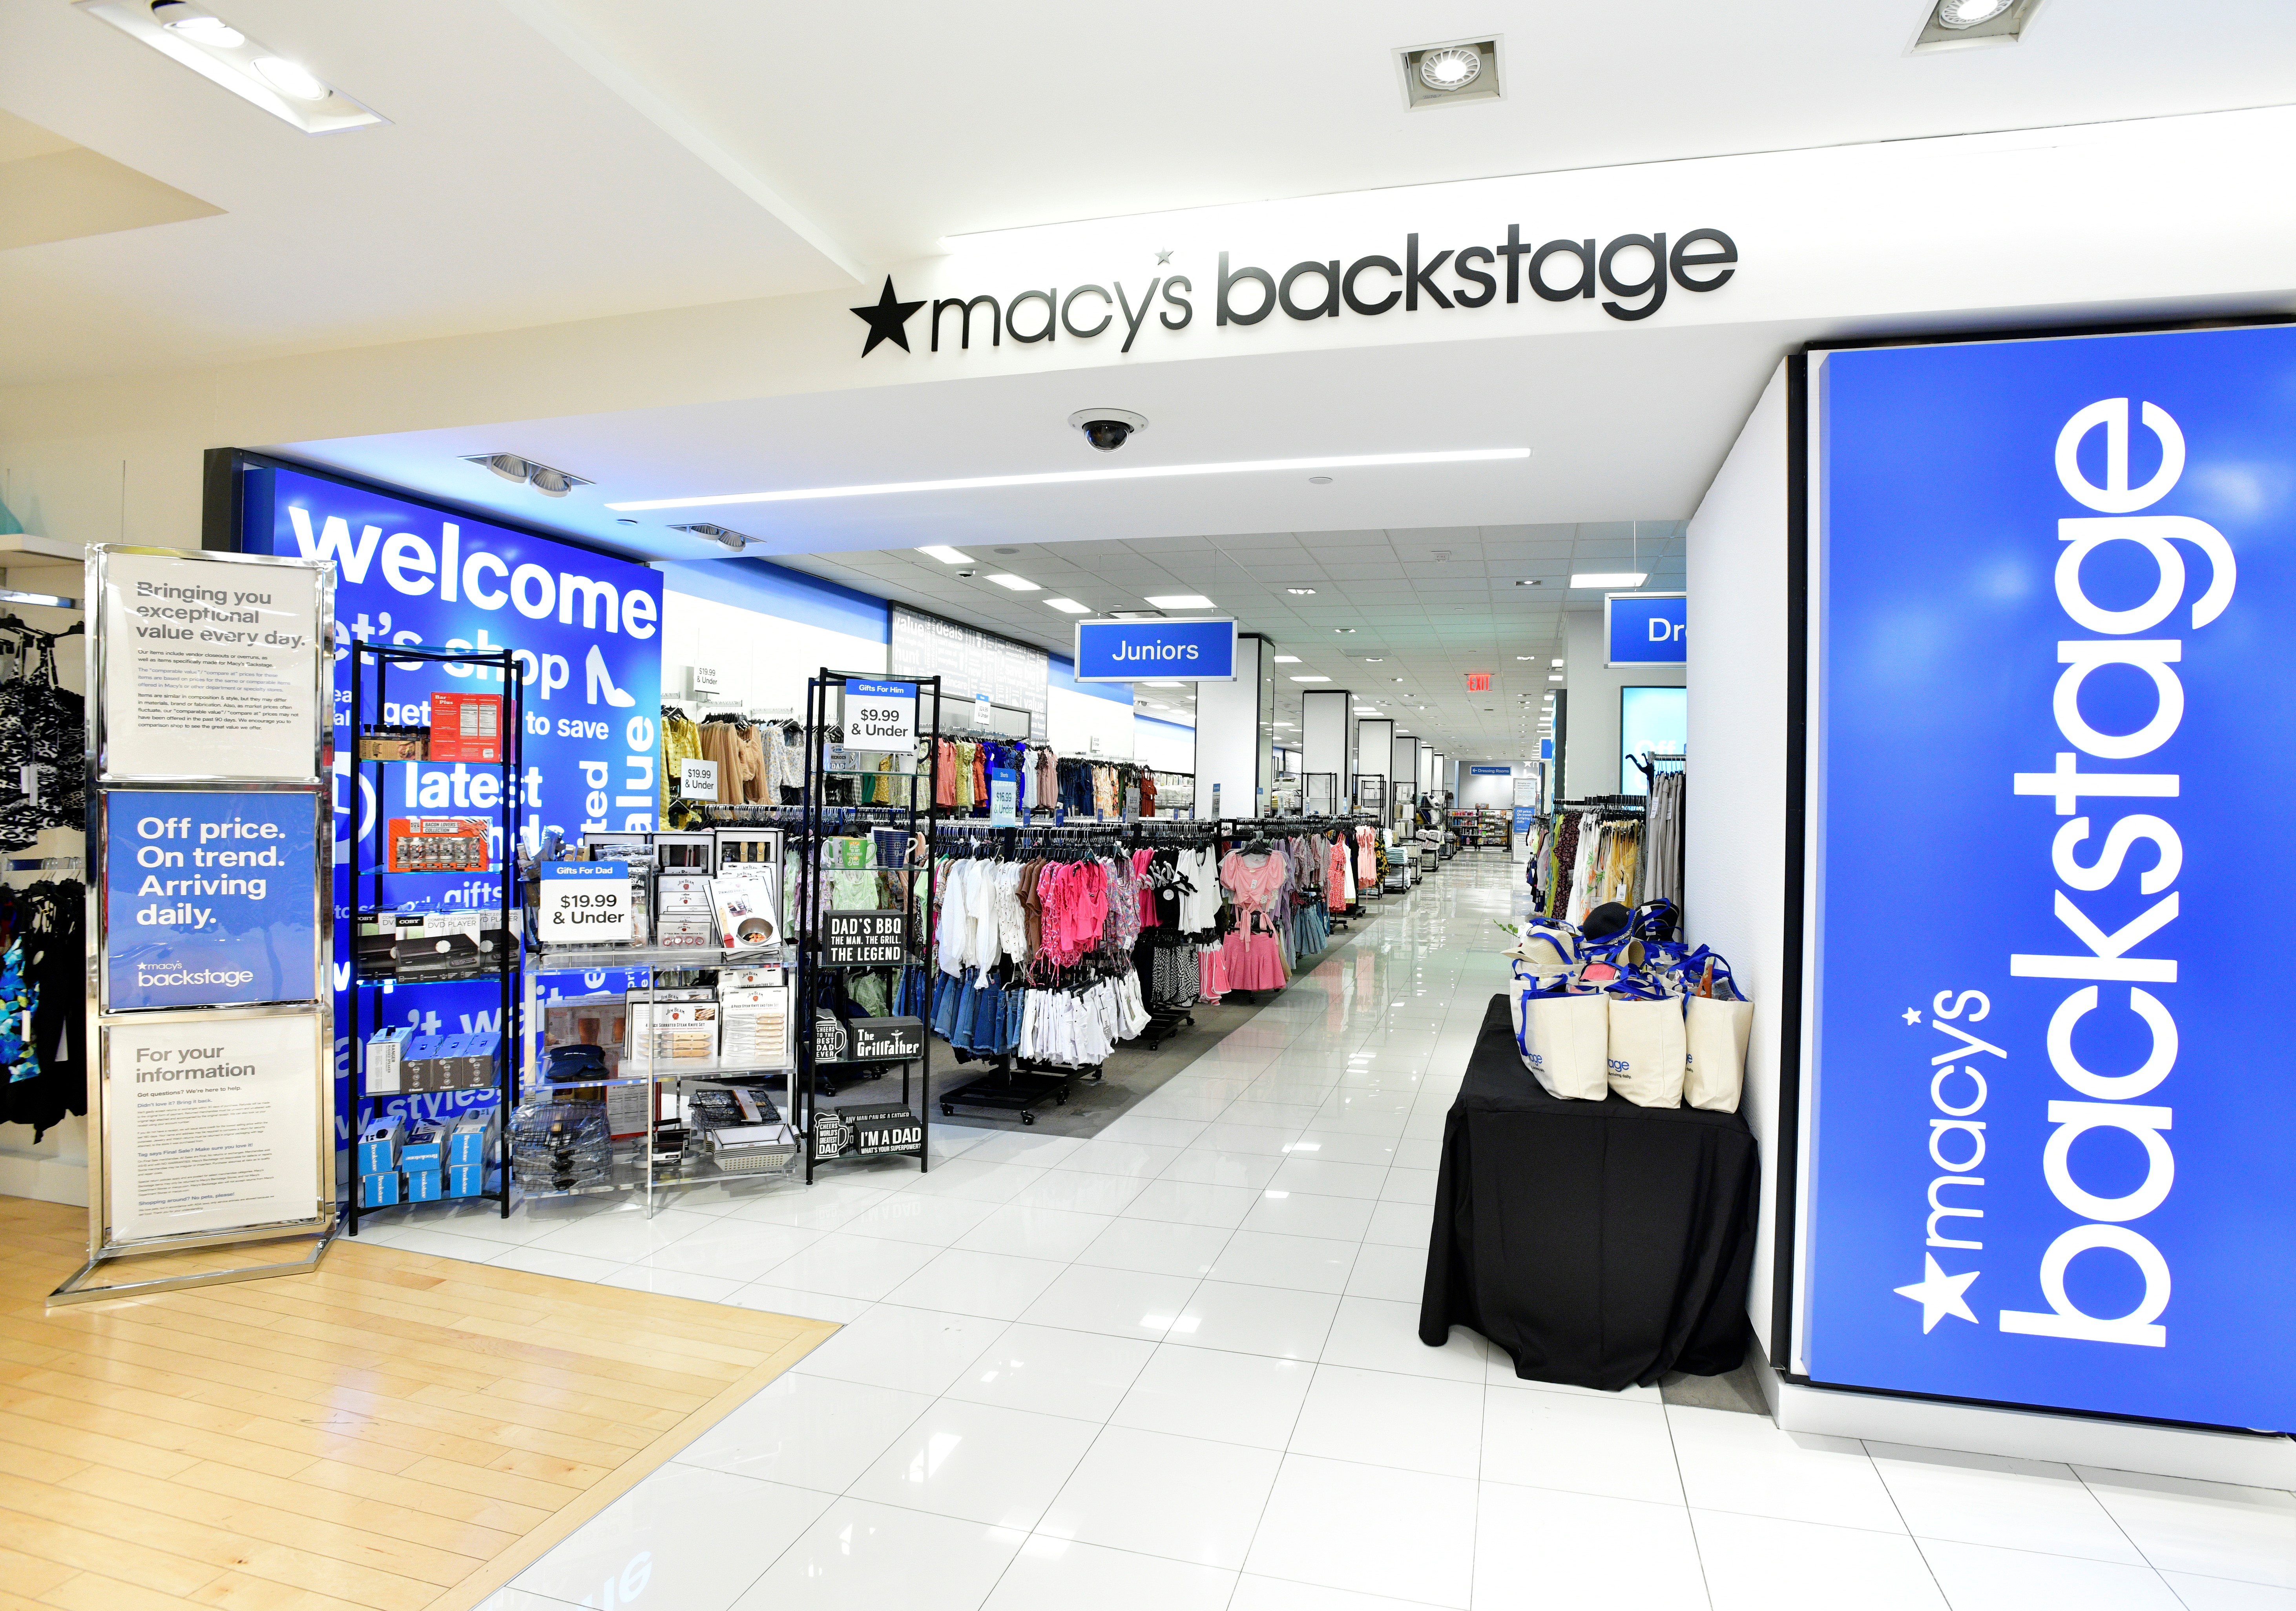 Macy's Backstage Opens At Macy's Herald Square – WWD